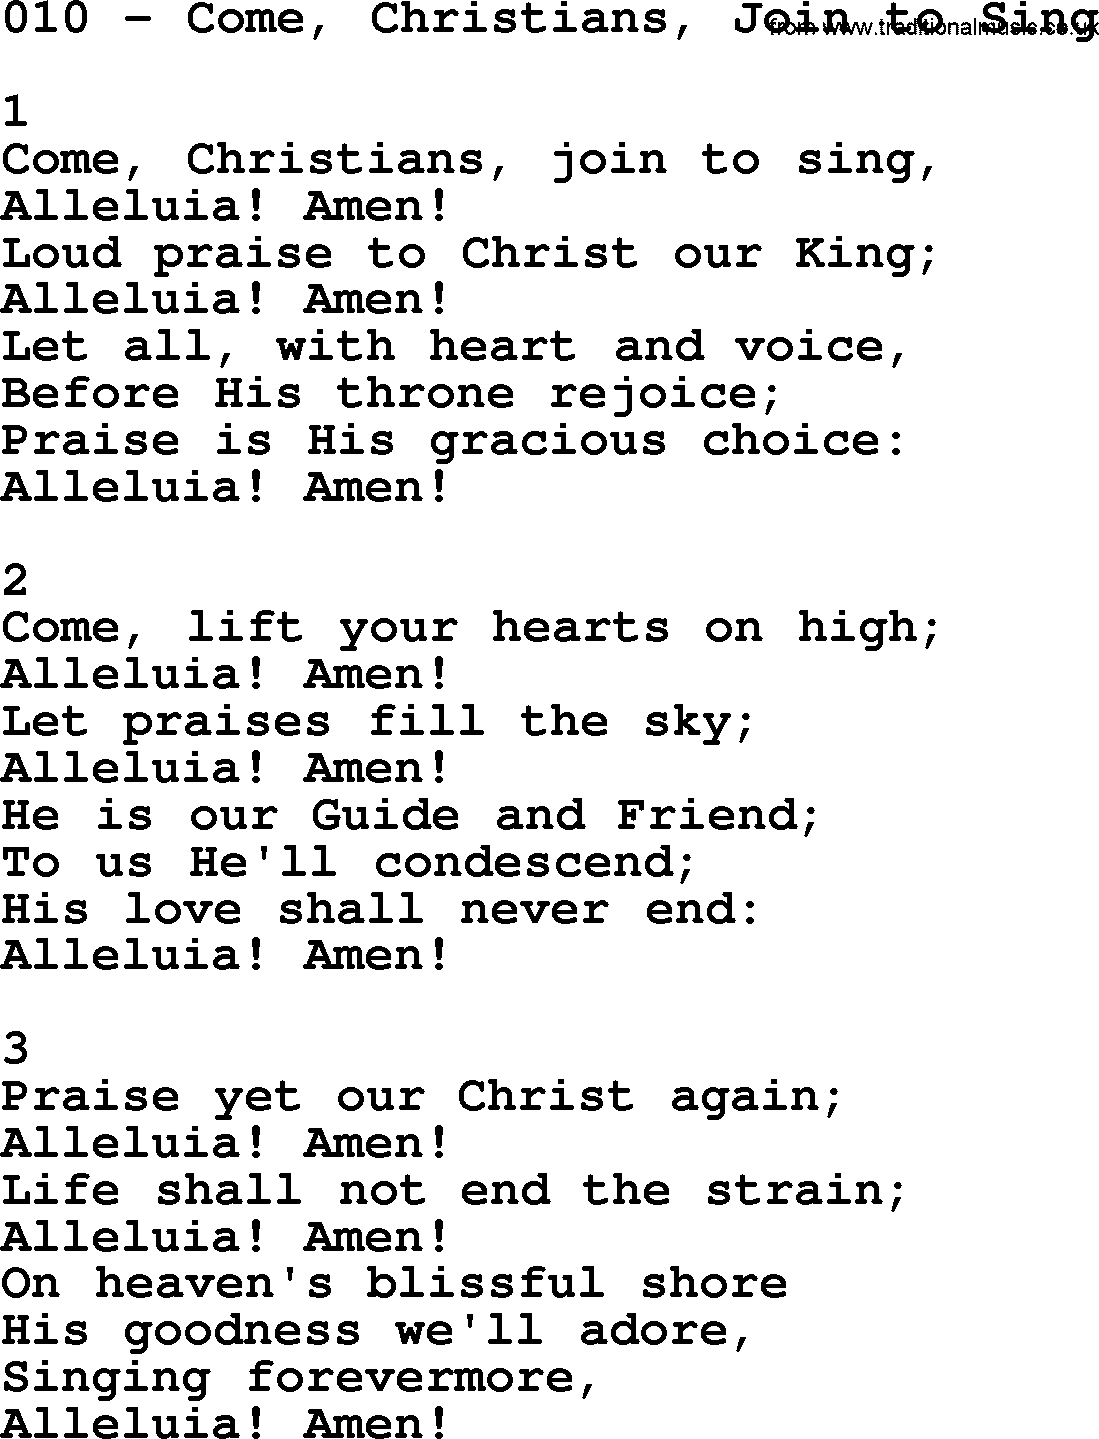 Complete Adventis Hymnal, title: 010-Come, Christians, Join To Sing, with lyrics, midi, mp3, powerpoints(PPT) and PDF,